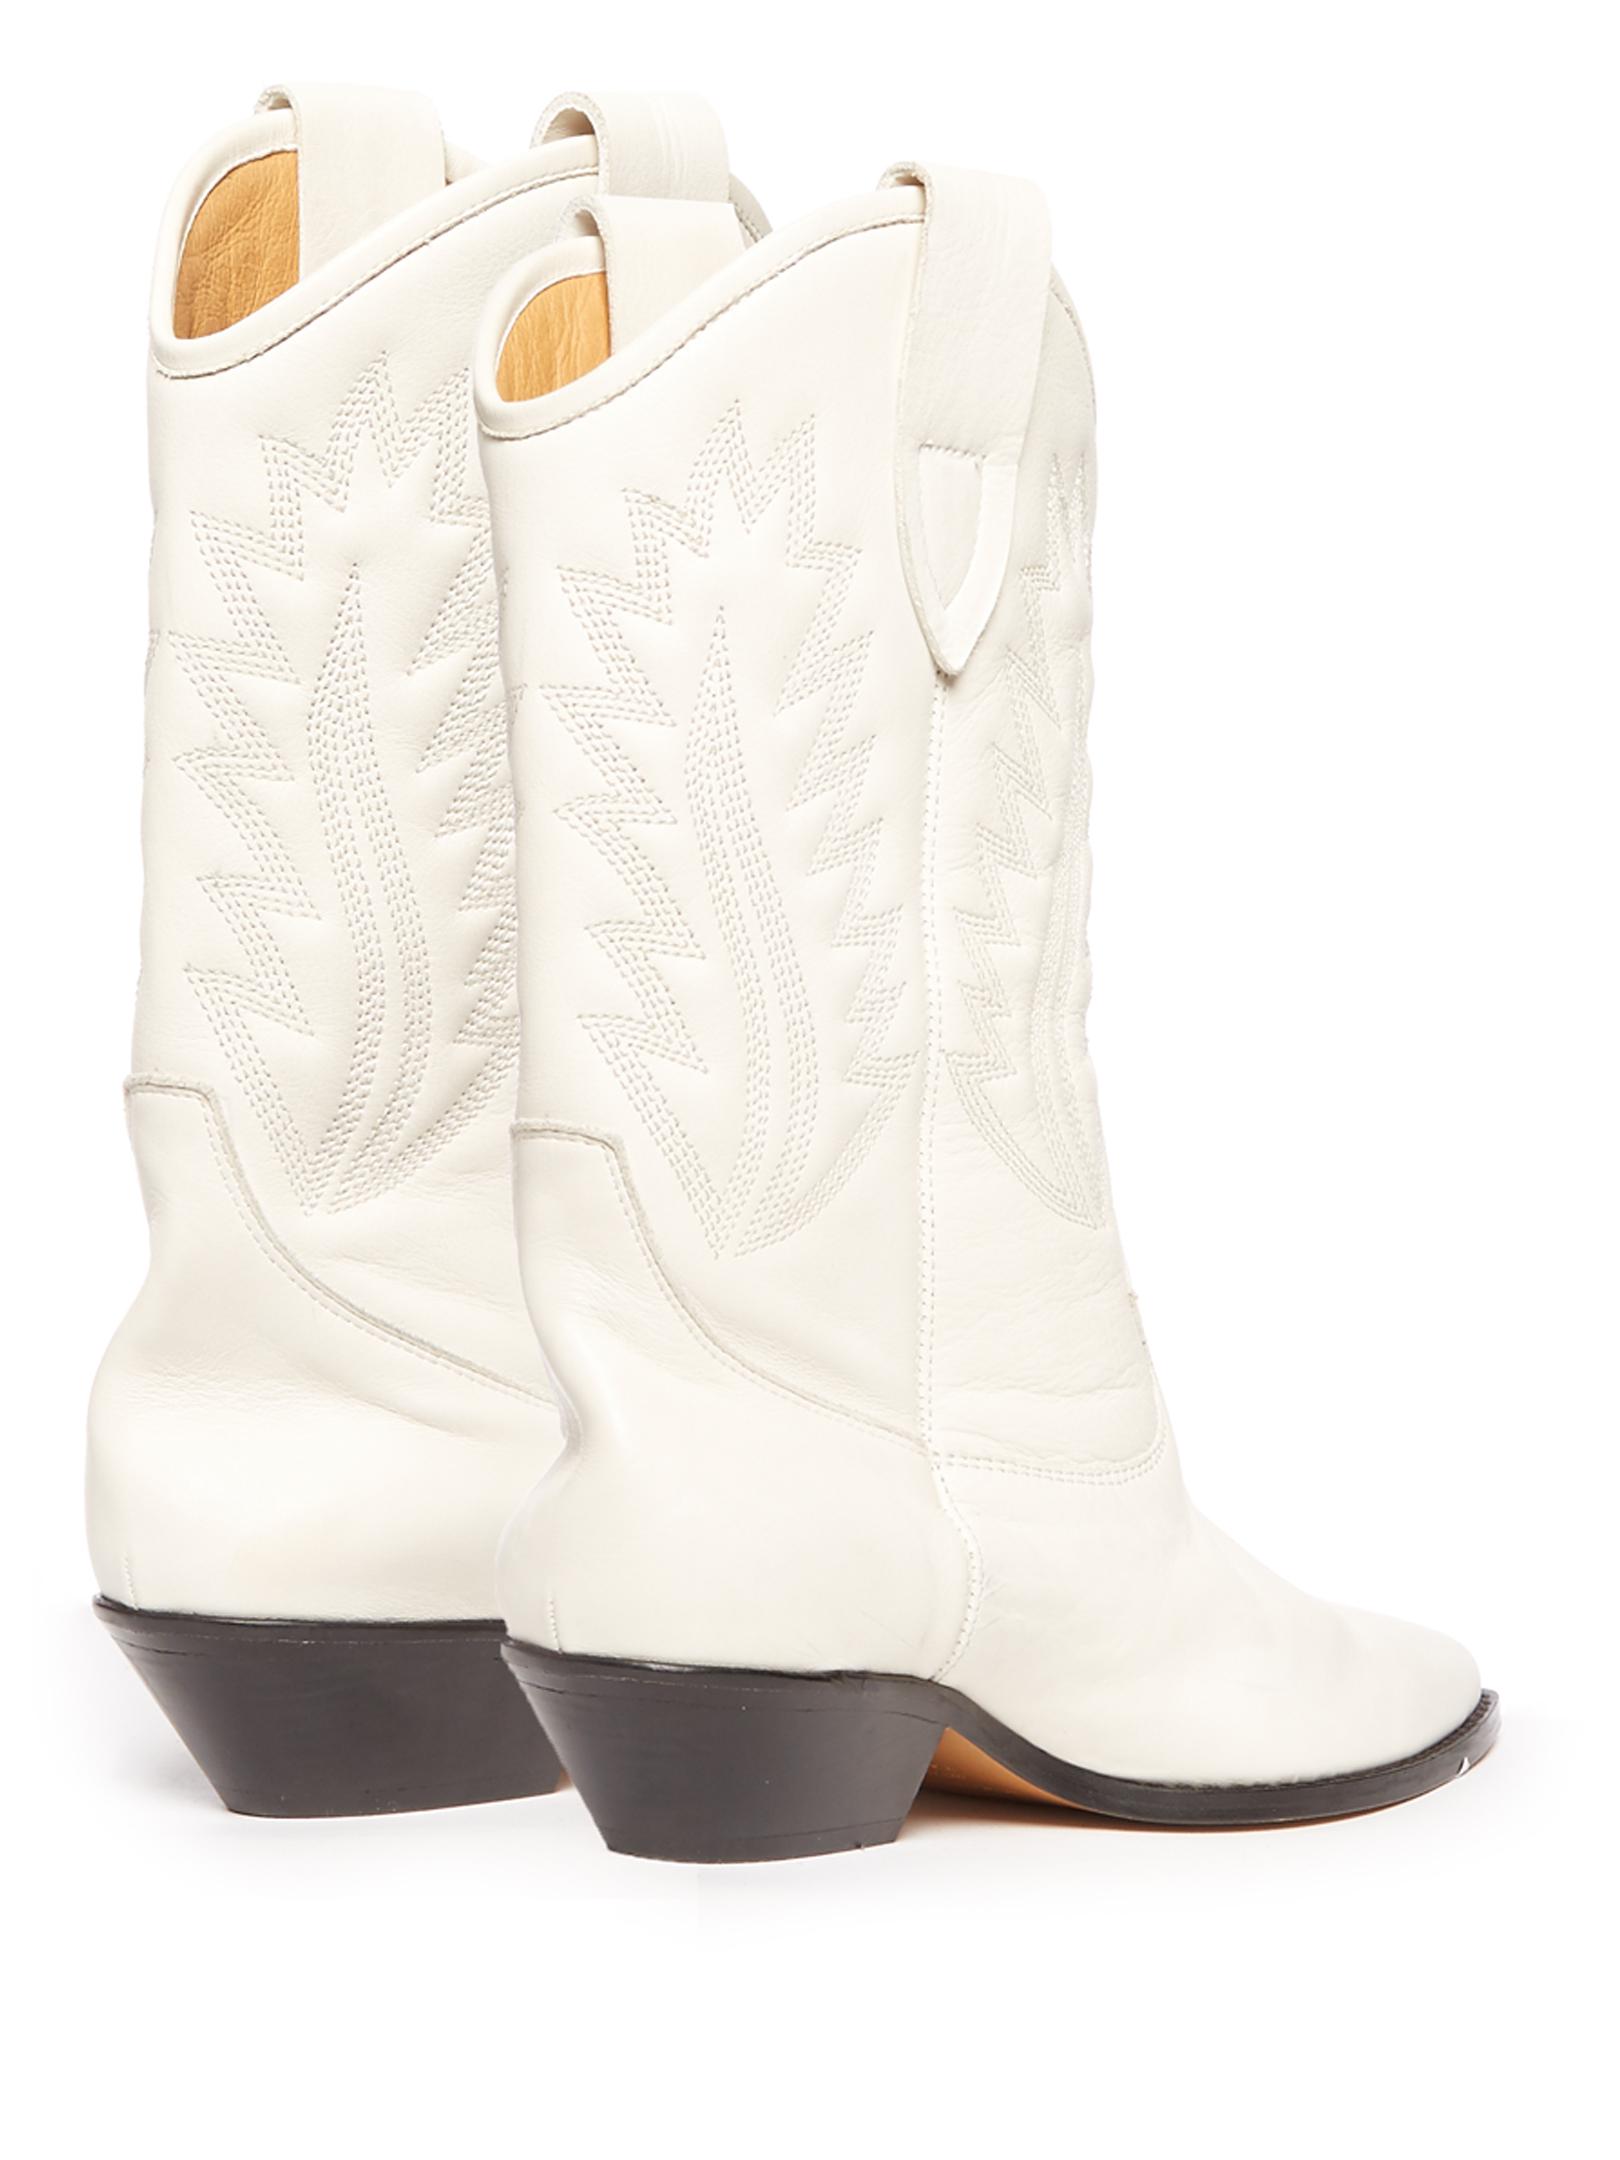 Isabel Marant Étoile Dallin Leather Western Boots in White - Lyst